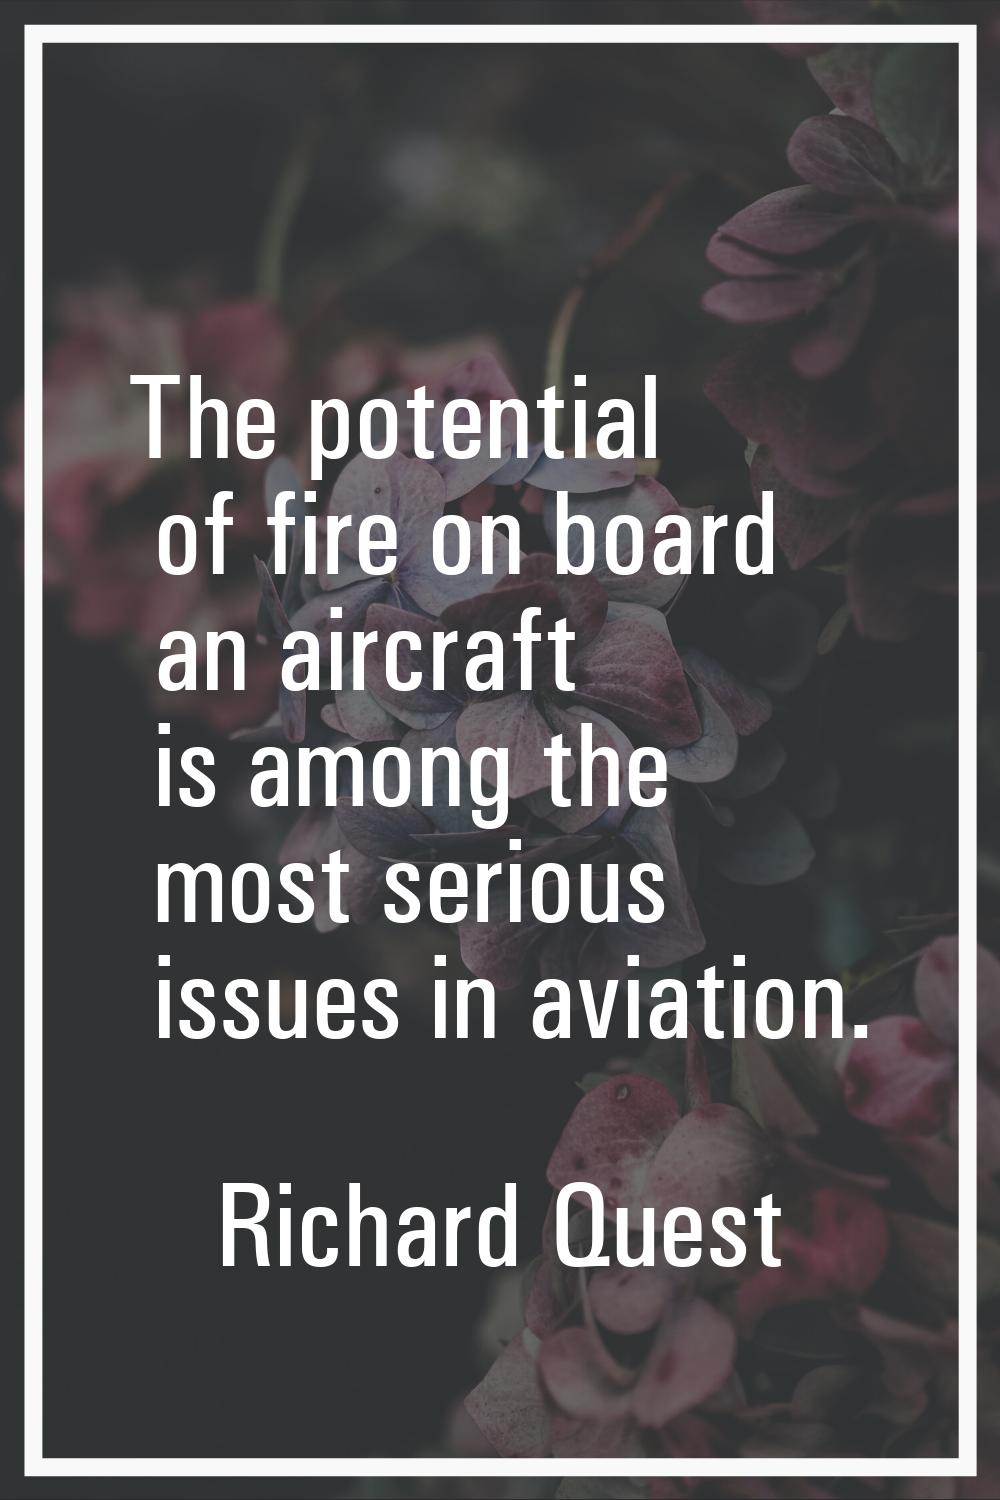 The potential of fire on board an aircraft is among the most serious issues in aviation.